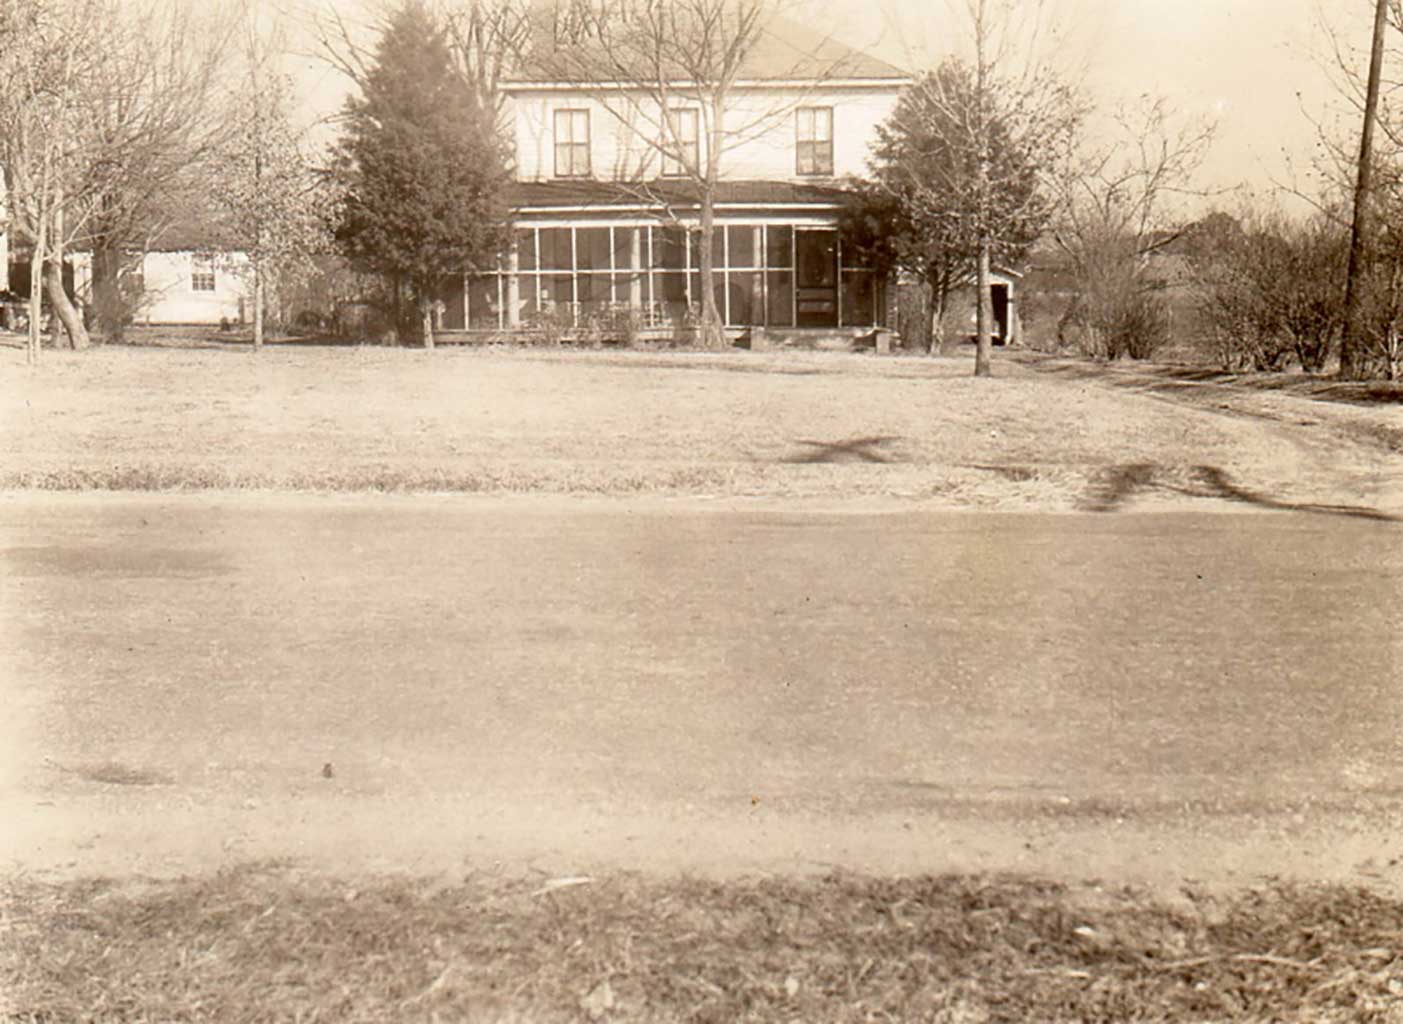 gilliam-home-with-miss-patty's-house-in-background-1956-img355